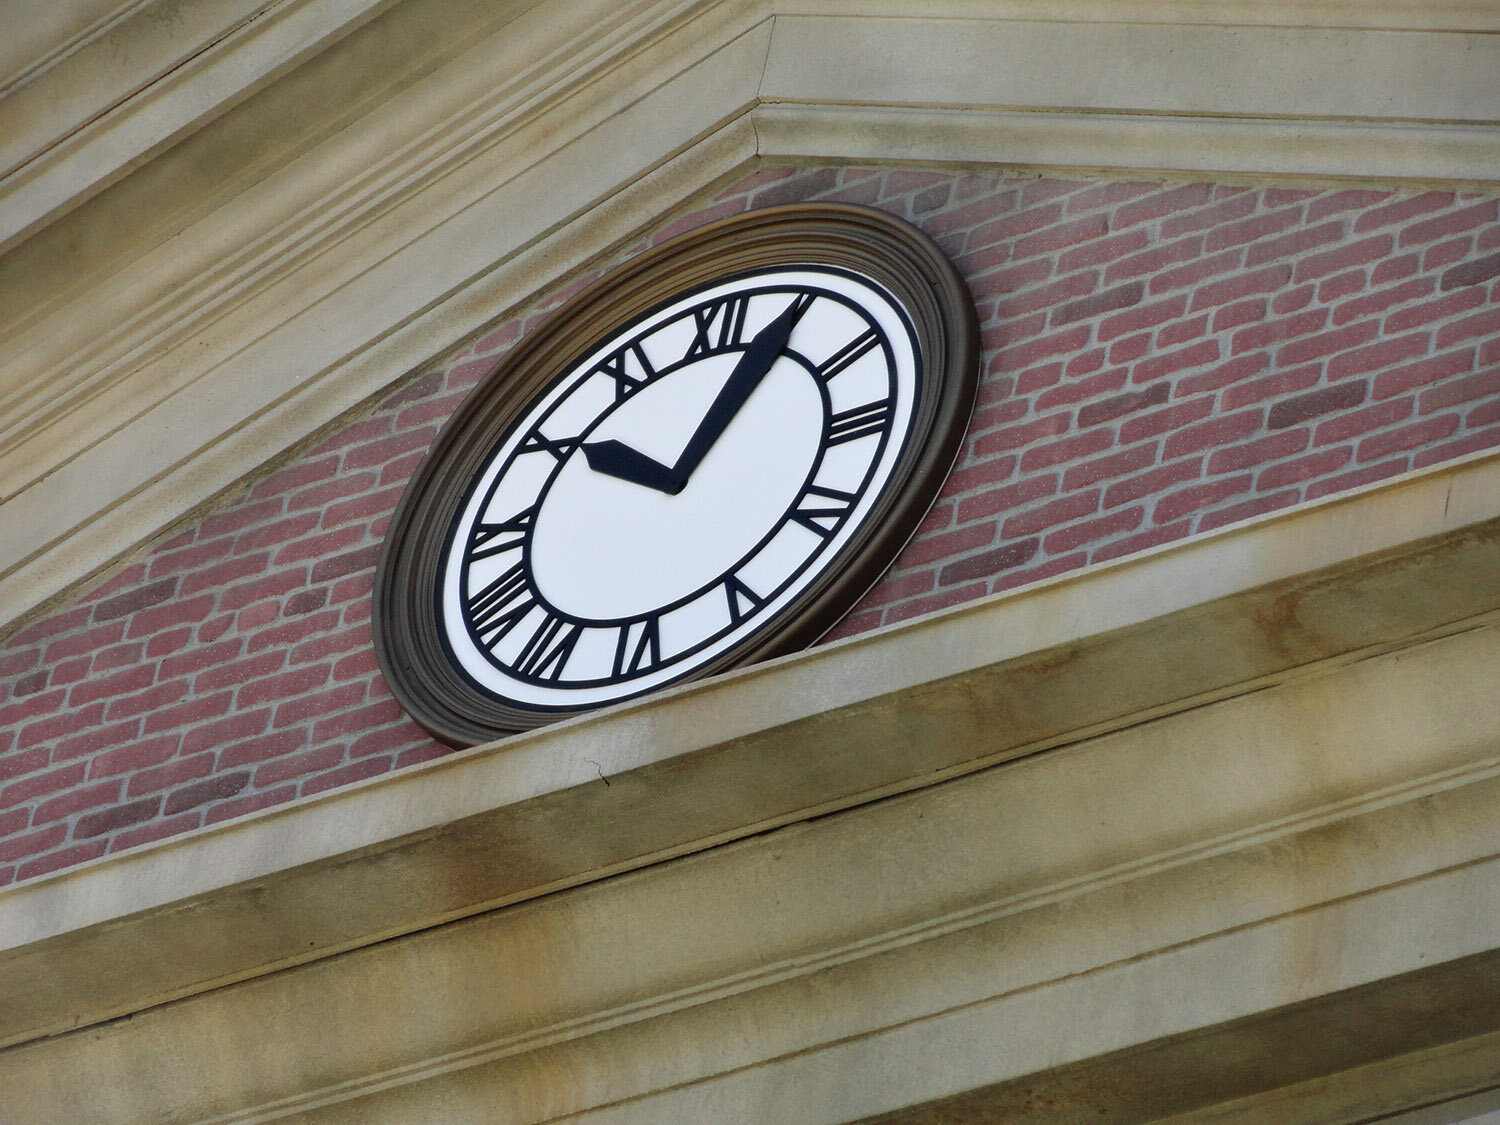  The Hill Valley clock tower in Courthouse Square (photo by Stephen Clark, ©2011, To Be Continued, LLC) 